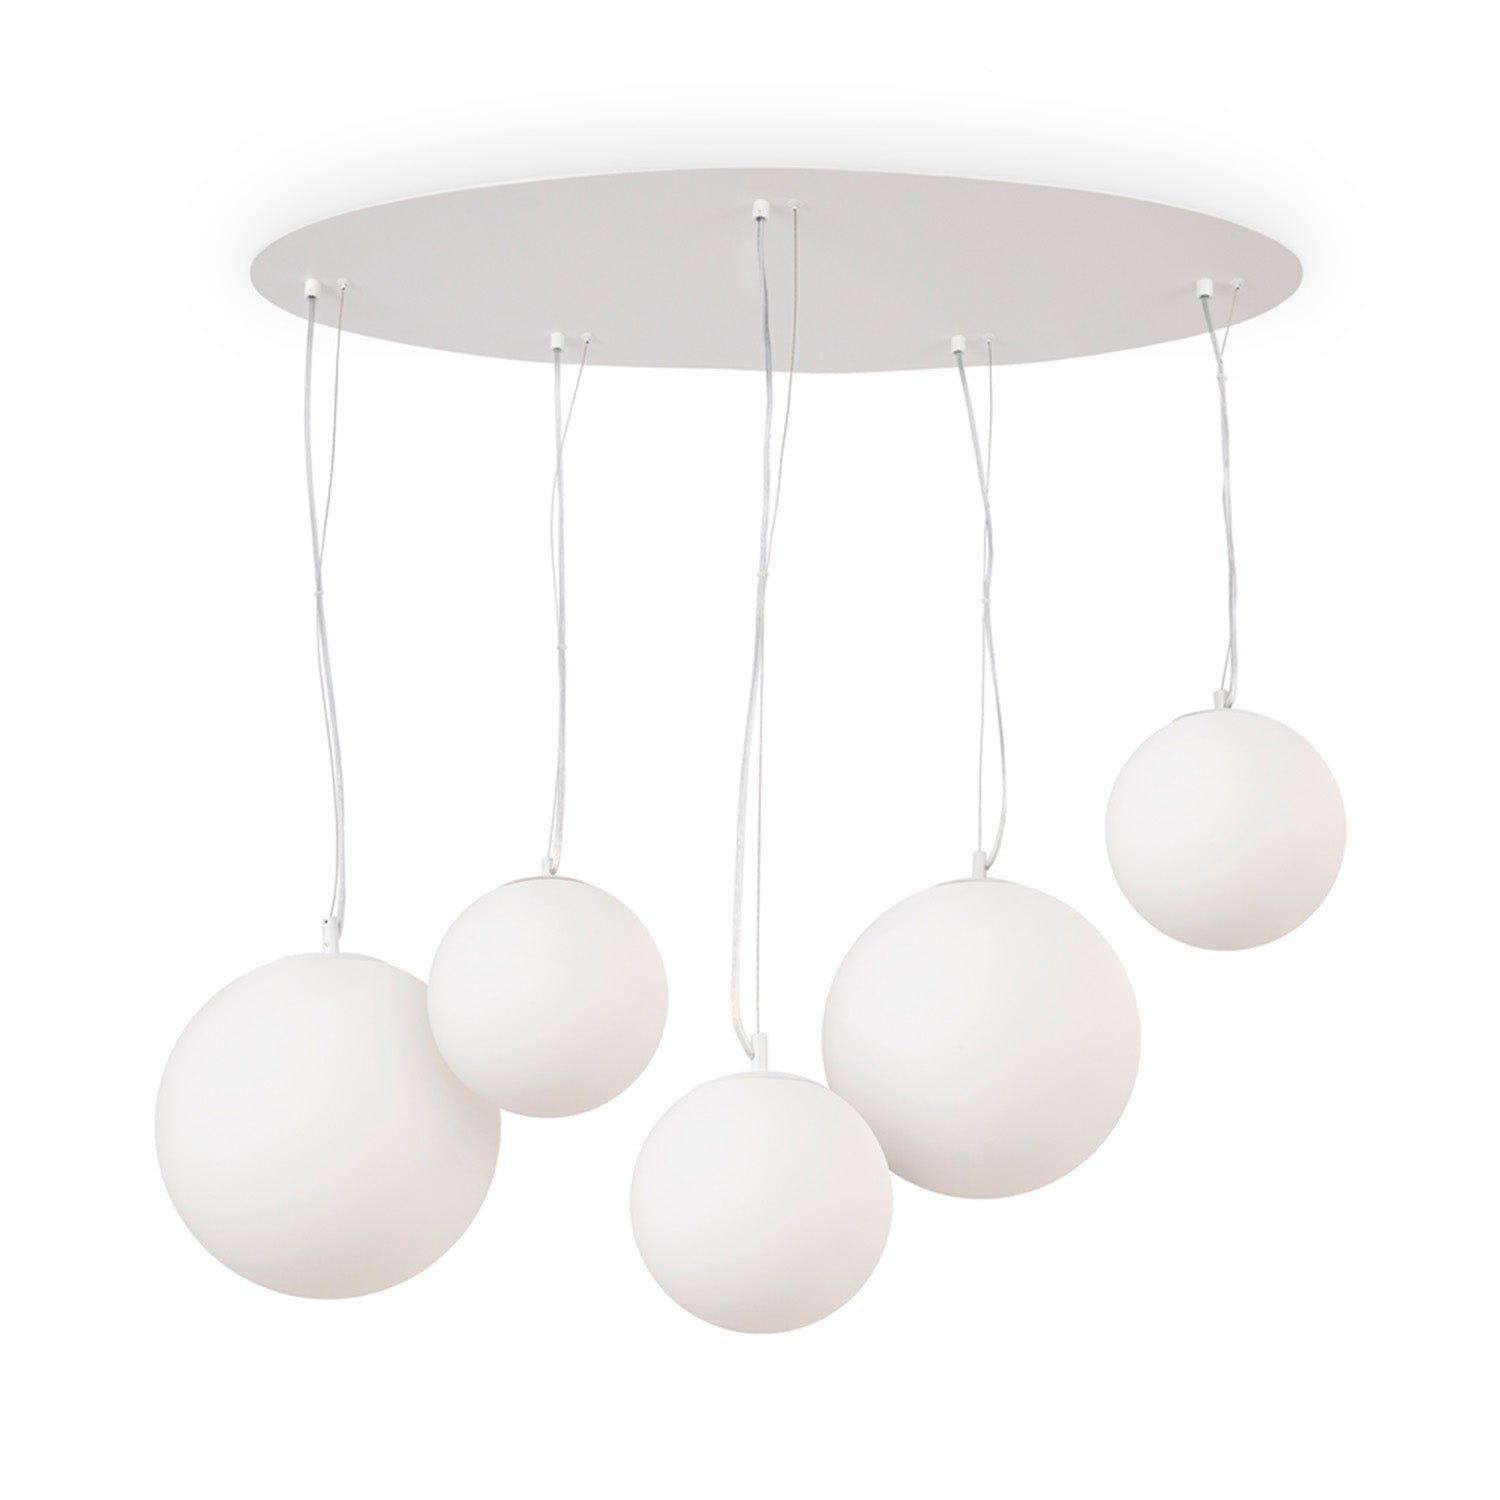 BASIC FORM 5 - 5 globe pendant lamp in oval opaque glass